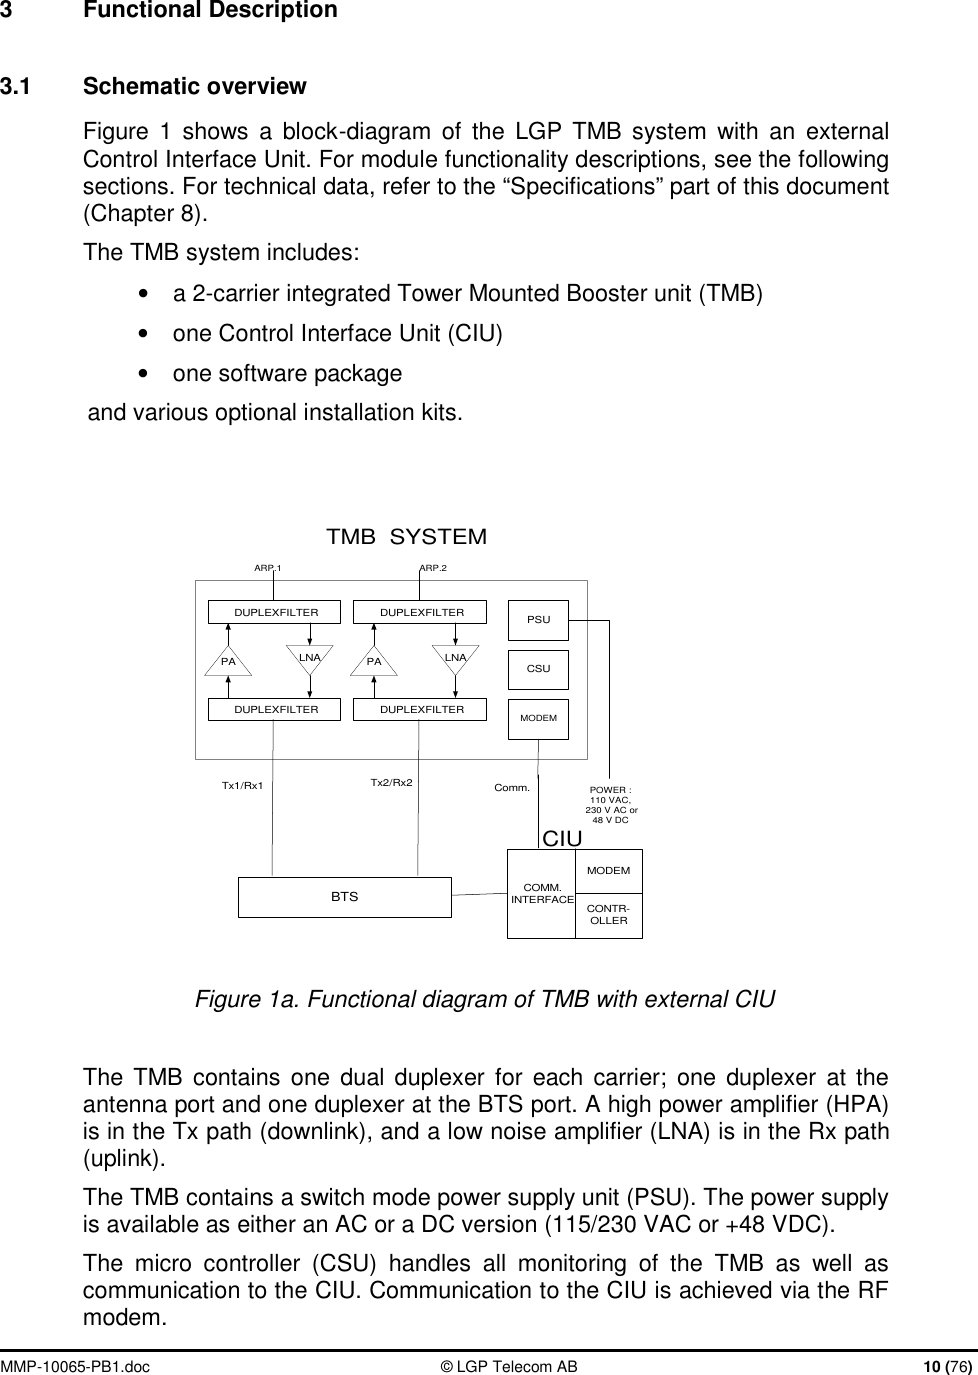  MMP-10065-PB1.doc  © LGP Telecom AB  10 (76)  3  Functional Description  3.1  Schematic overview Figure 1 shows a block-diagram of the LGP TMB system with an external Control Interface Unit. For module functionality descriptions, see the following sections. For technical data, refer to the “Specifications” part of this document (Chapter 8). The TMB system includes: •  a 2-carrier integrated Tower Mounted Booster unit (TMB) • one Control Interface Unit (CIU) •  one software package and various optional installation kits.     PA LNADUPLEXFILTERDUPLEXFILTERPA LNADUPLEXFILTERDUPLEXFILTERPSUCSUMODEMTMB  SYSTEMMODEMCONTR-OLLERCOMM.INTERFACEBTSTx1/Rx1 Tx2/Rx2POWER :110 VAC, 230 V AC or48 V DCComm.CIUARP.1 ARP.2     Figure 1a. Functional diagram of TMB with external CIU        The TMB contains one dual duplexer for each carrier; one duplexer at the antenna port and one duplexer at the BTS port. A high power amplifier (HPA) is in the Tx path (downlink), and a low noise amplifier (LNA) is in the Rx path (uplink). The TMB contains a switch mode power supply unit (PSU). The power supply is available as either an AC or a DC version (115/230 VAC or +48 VDC).  The micro controller (CSU) handles all monitoring of the TMB as well as communication to the CIU. Communication to the CIU is achieved via the RF modem. 